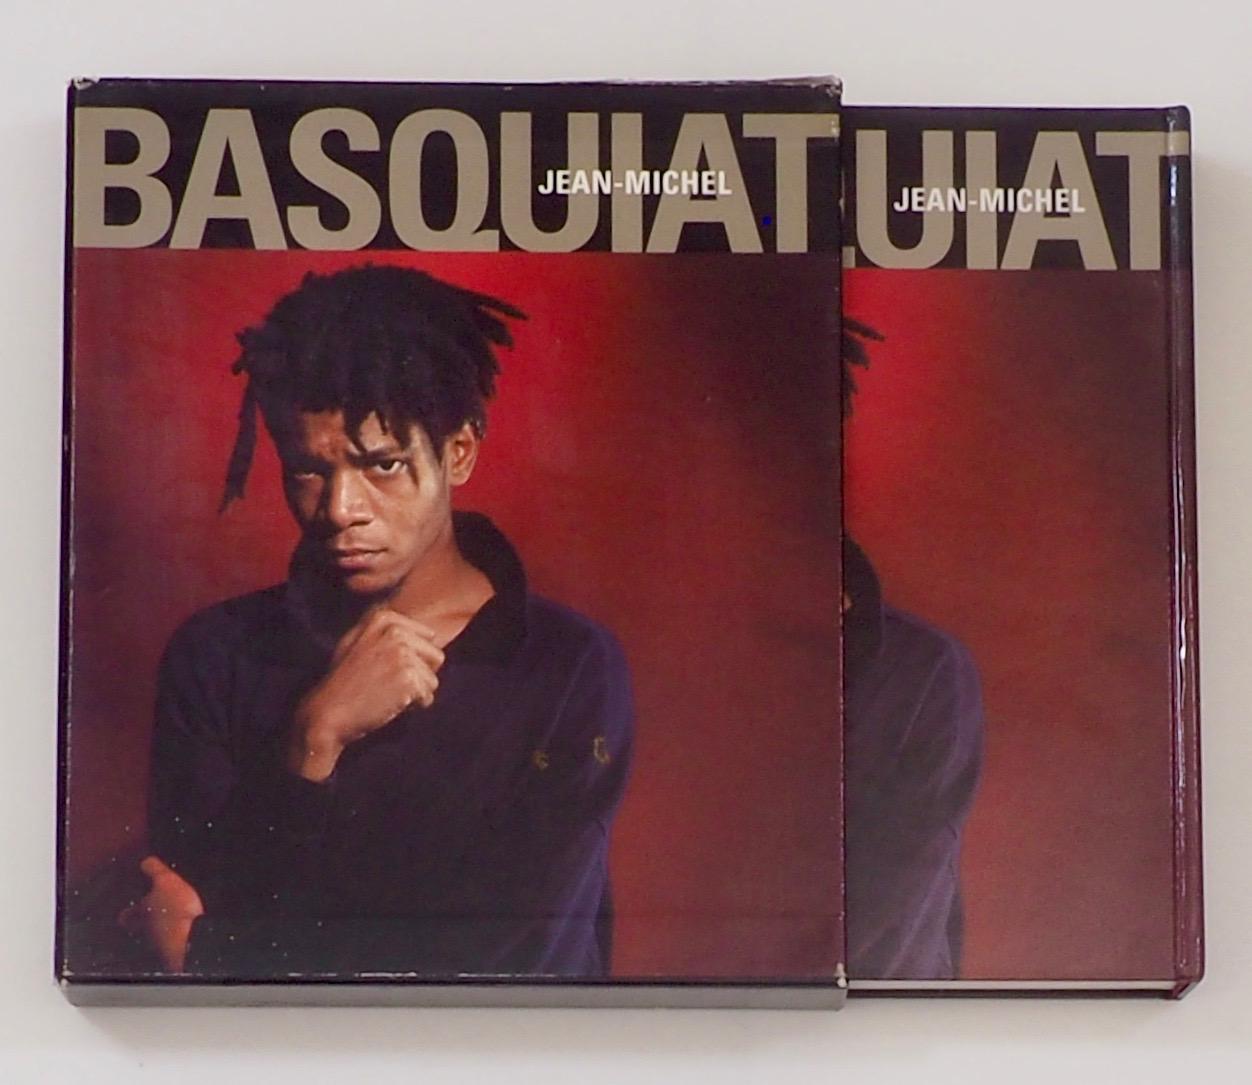 Jean-Michel Basquiat. Catalogue Raisonne of the Works on Paper.
Published by Galerie Enrico Navarra, Paris, 1999.

Rarely found, this richly illustrated catalogue raisonne is the first major publication devoted entirely to all Basquiat's prints,